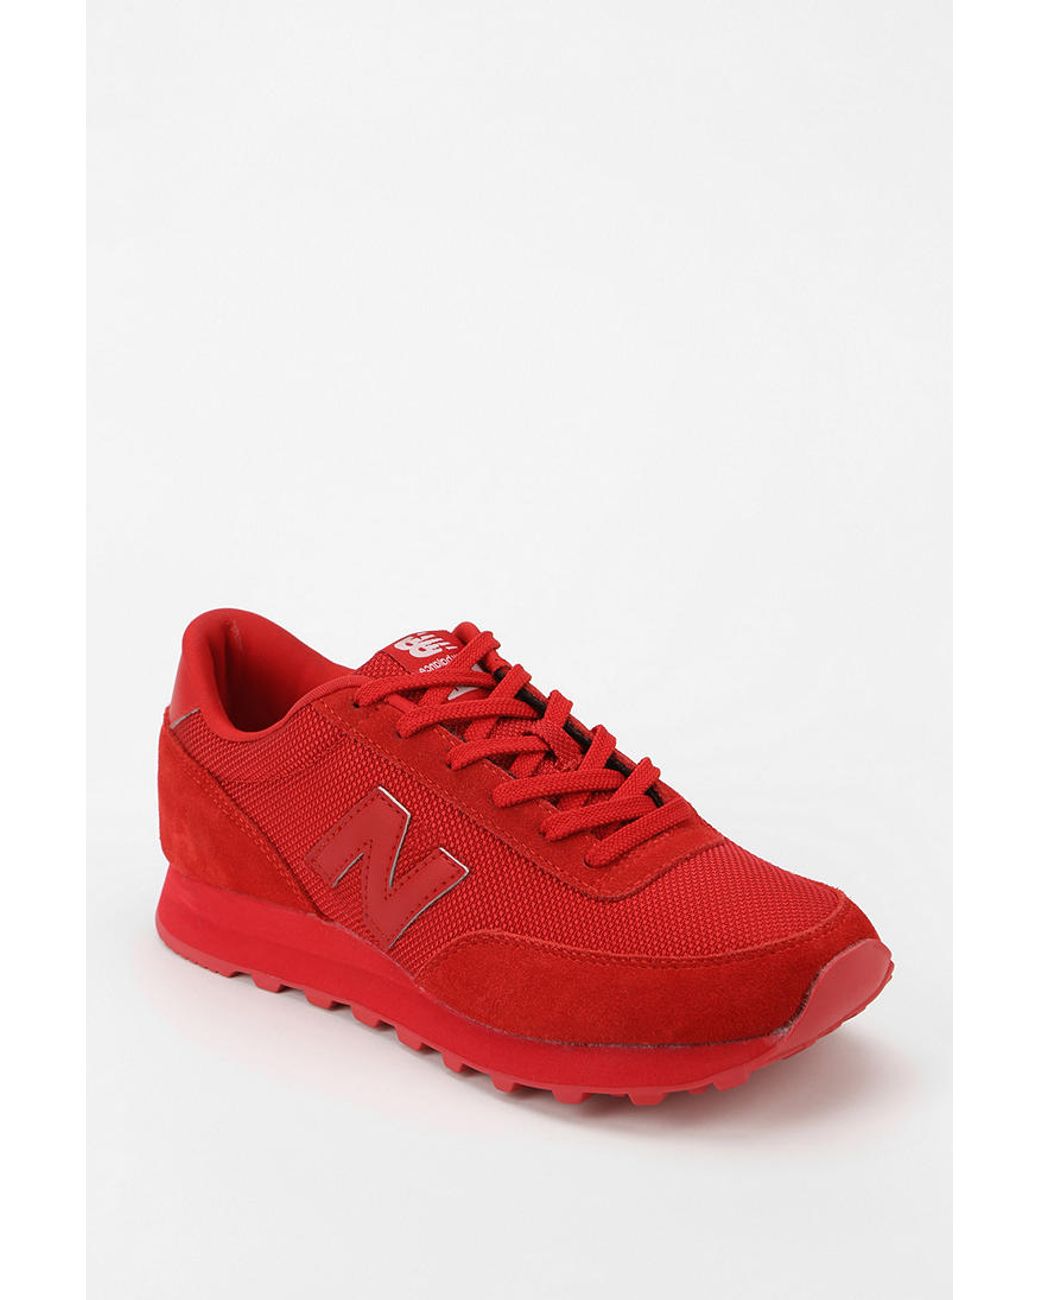 New Balance 501 Monochromatic Running Sneaker in Red | Lyst Canada